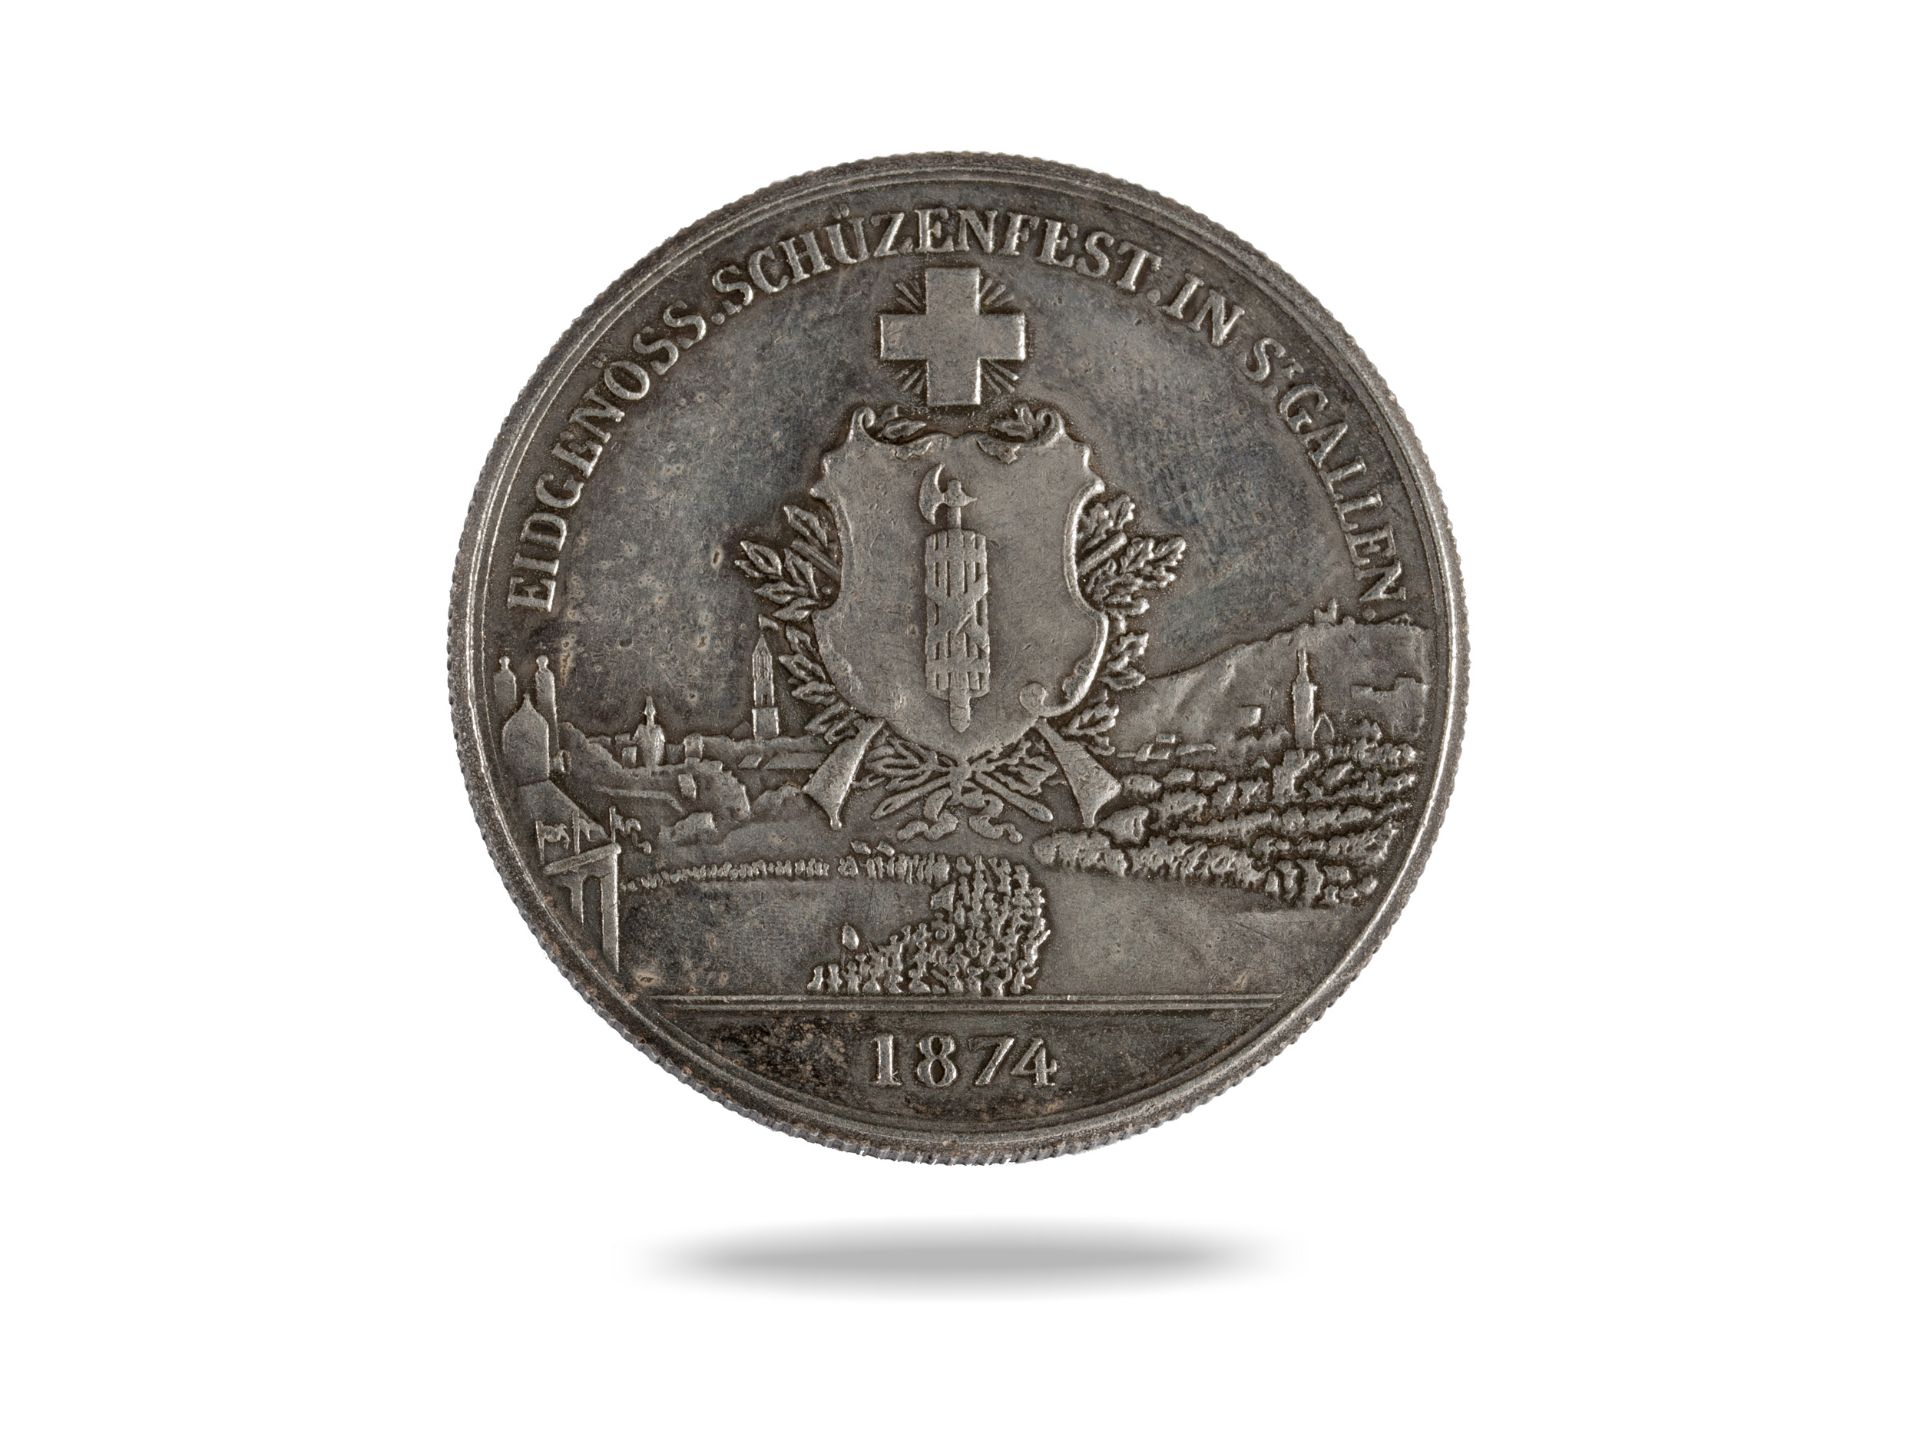 Silver coin, Federal Shooting Festival in St. Gallen, 1874 - Image 2 of 2